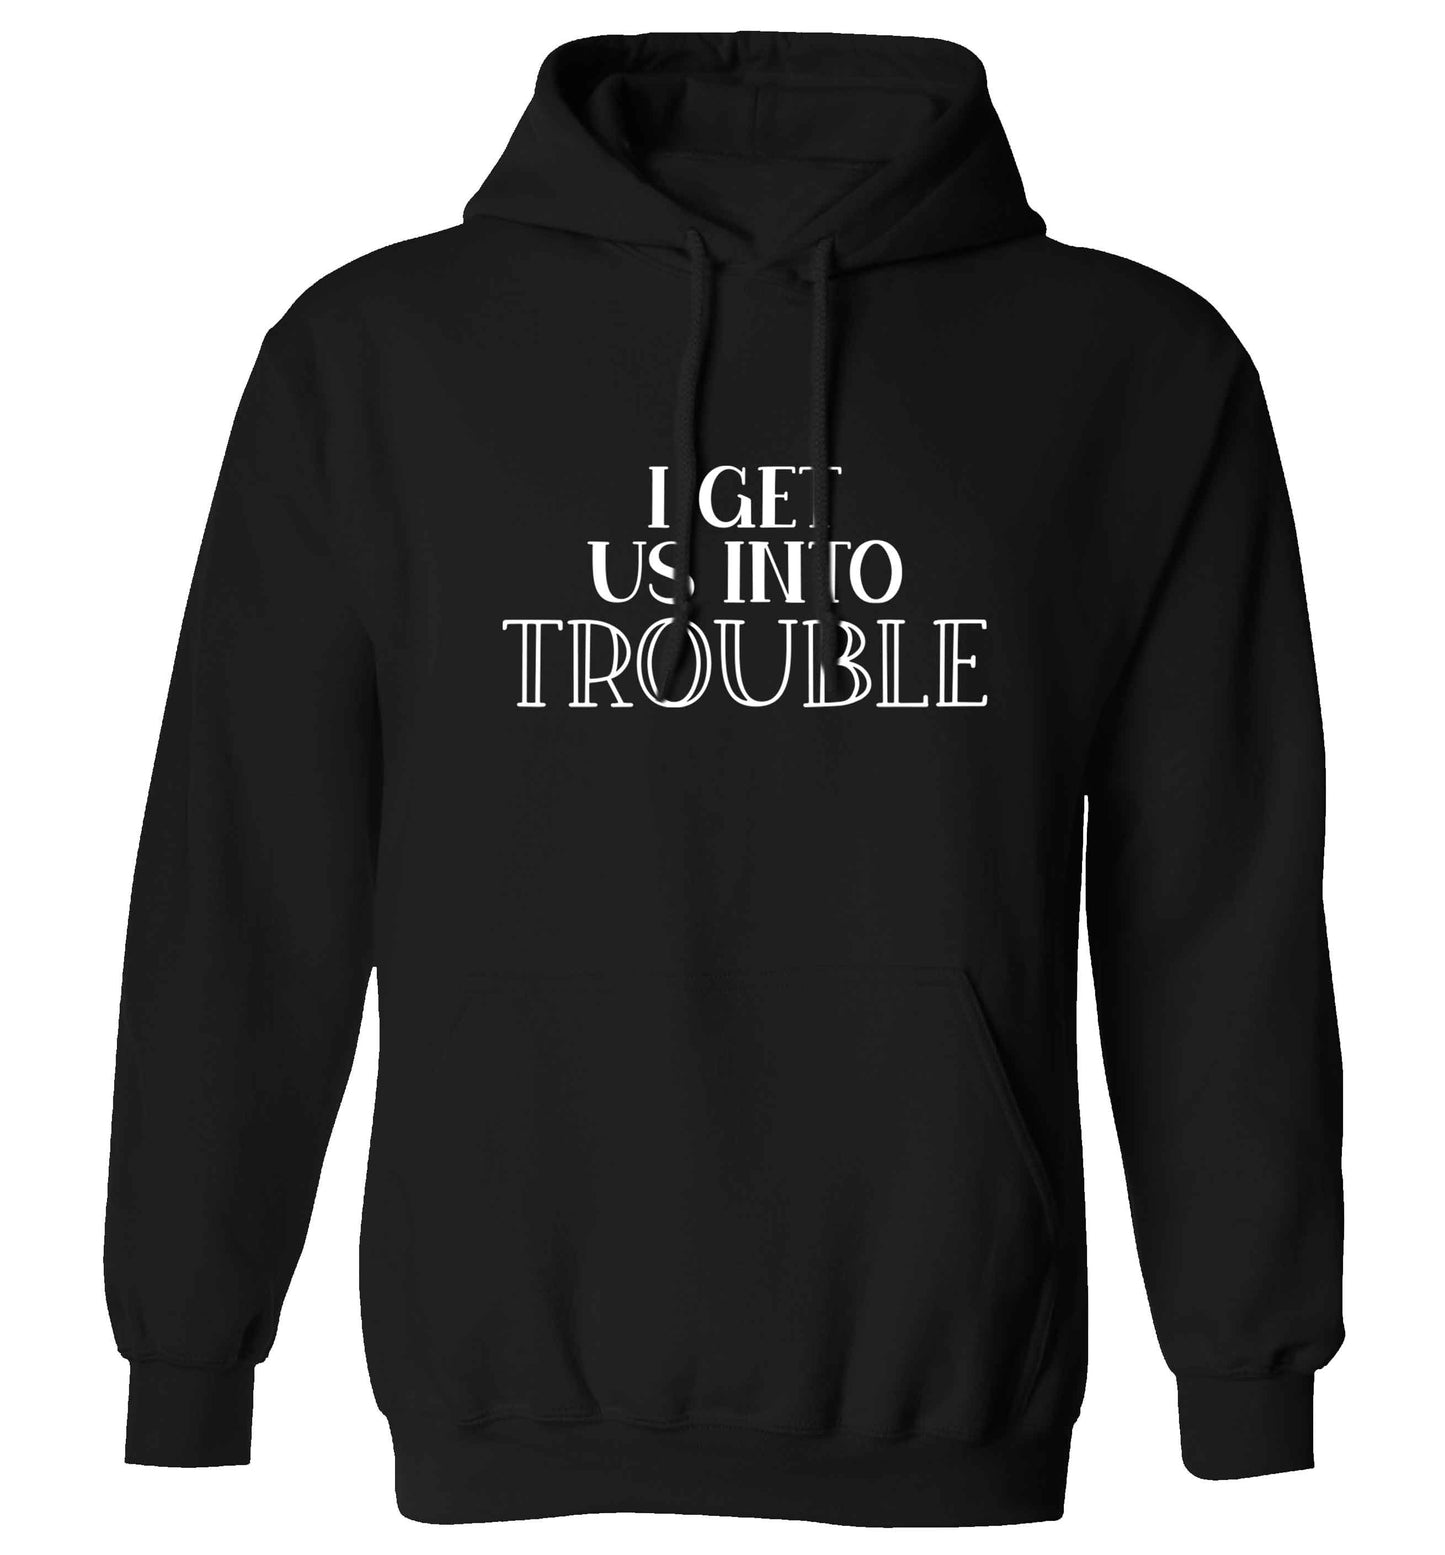 I get us into trouble adults unisex black hoodie 2XL